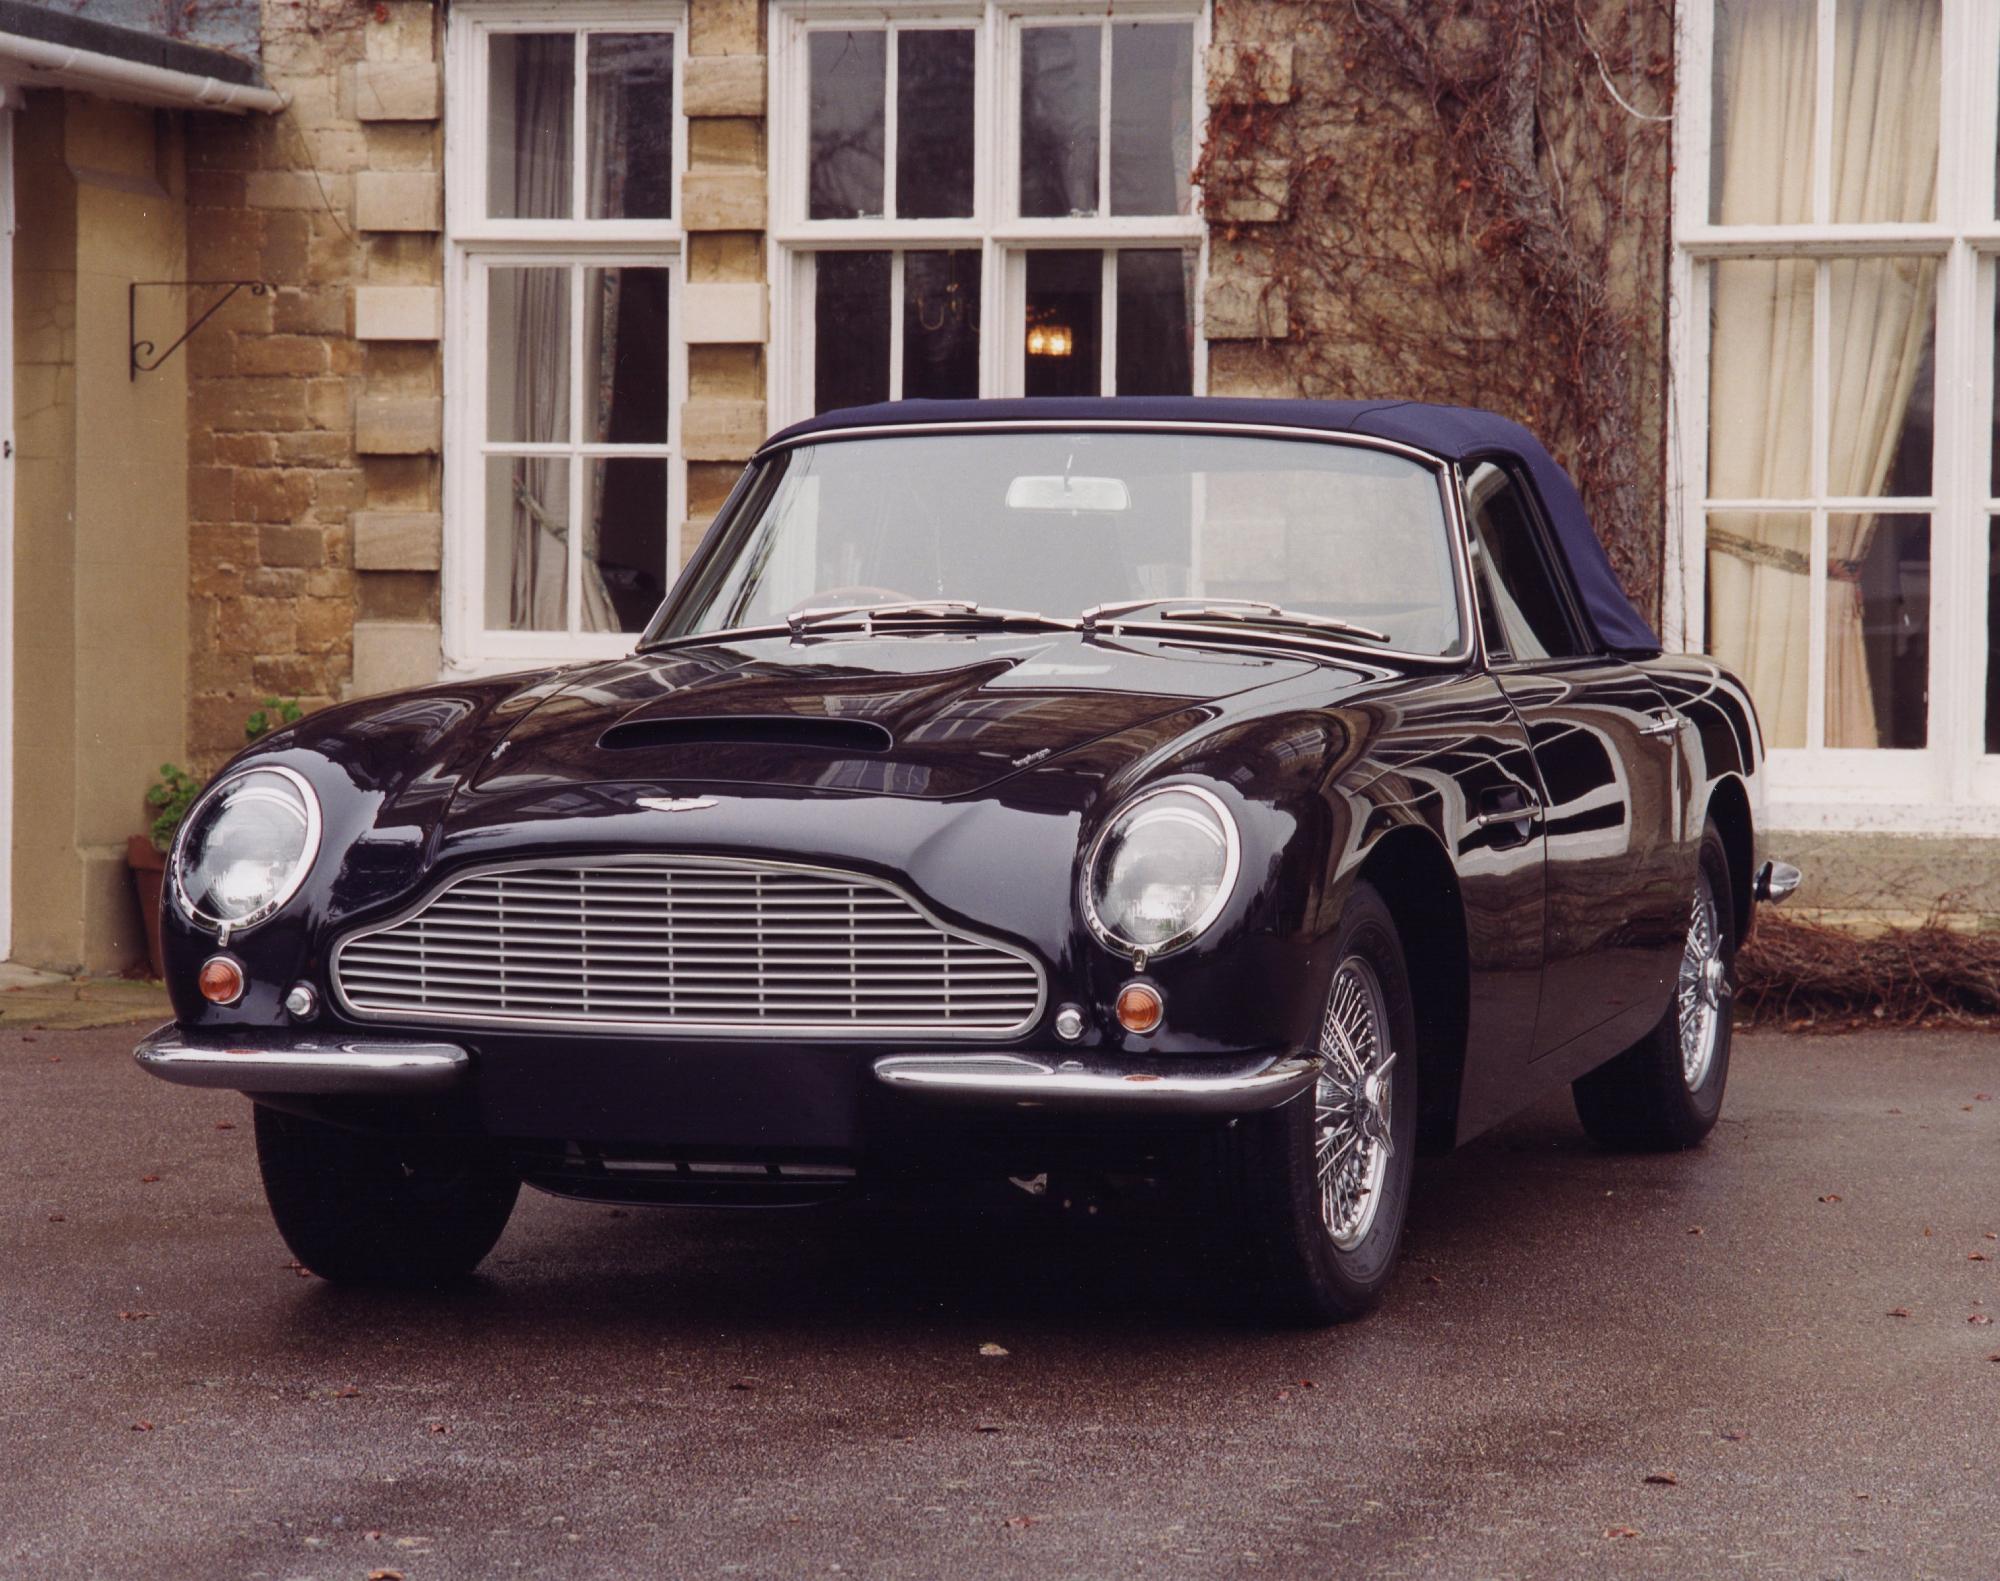 Produced from 1966-1969, the Aston Martin DB6 Volante is a true classic, and Prince Charles’ wine-powered one is fit for royalty.